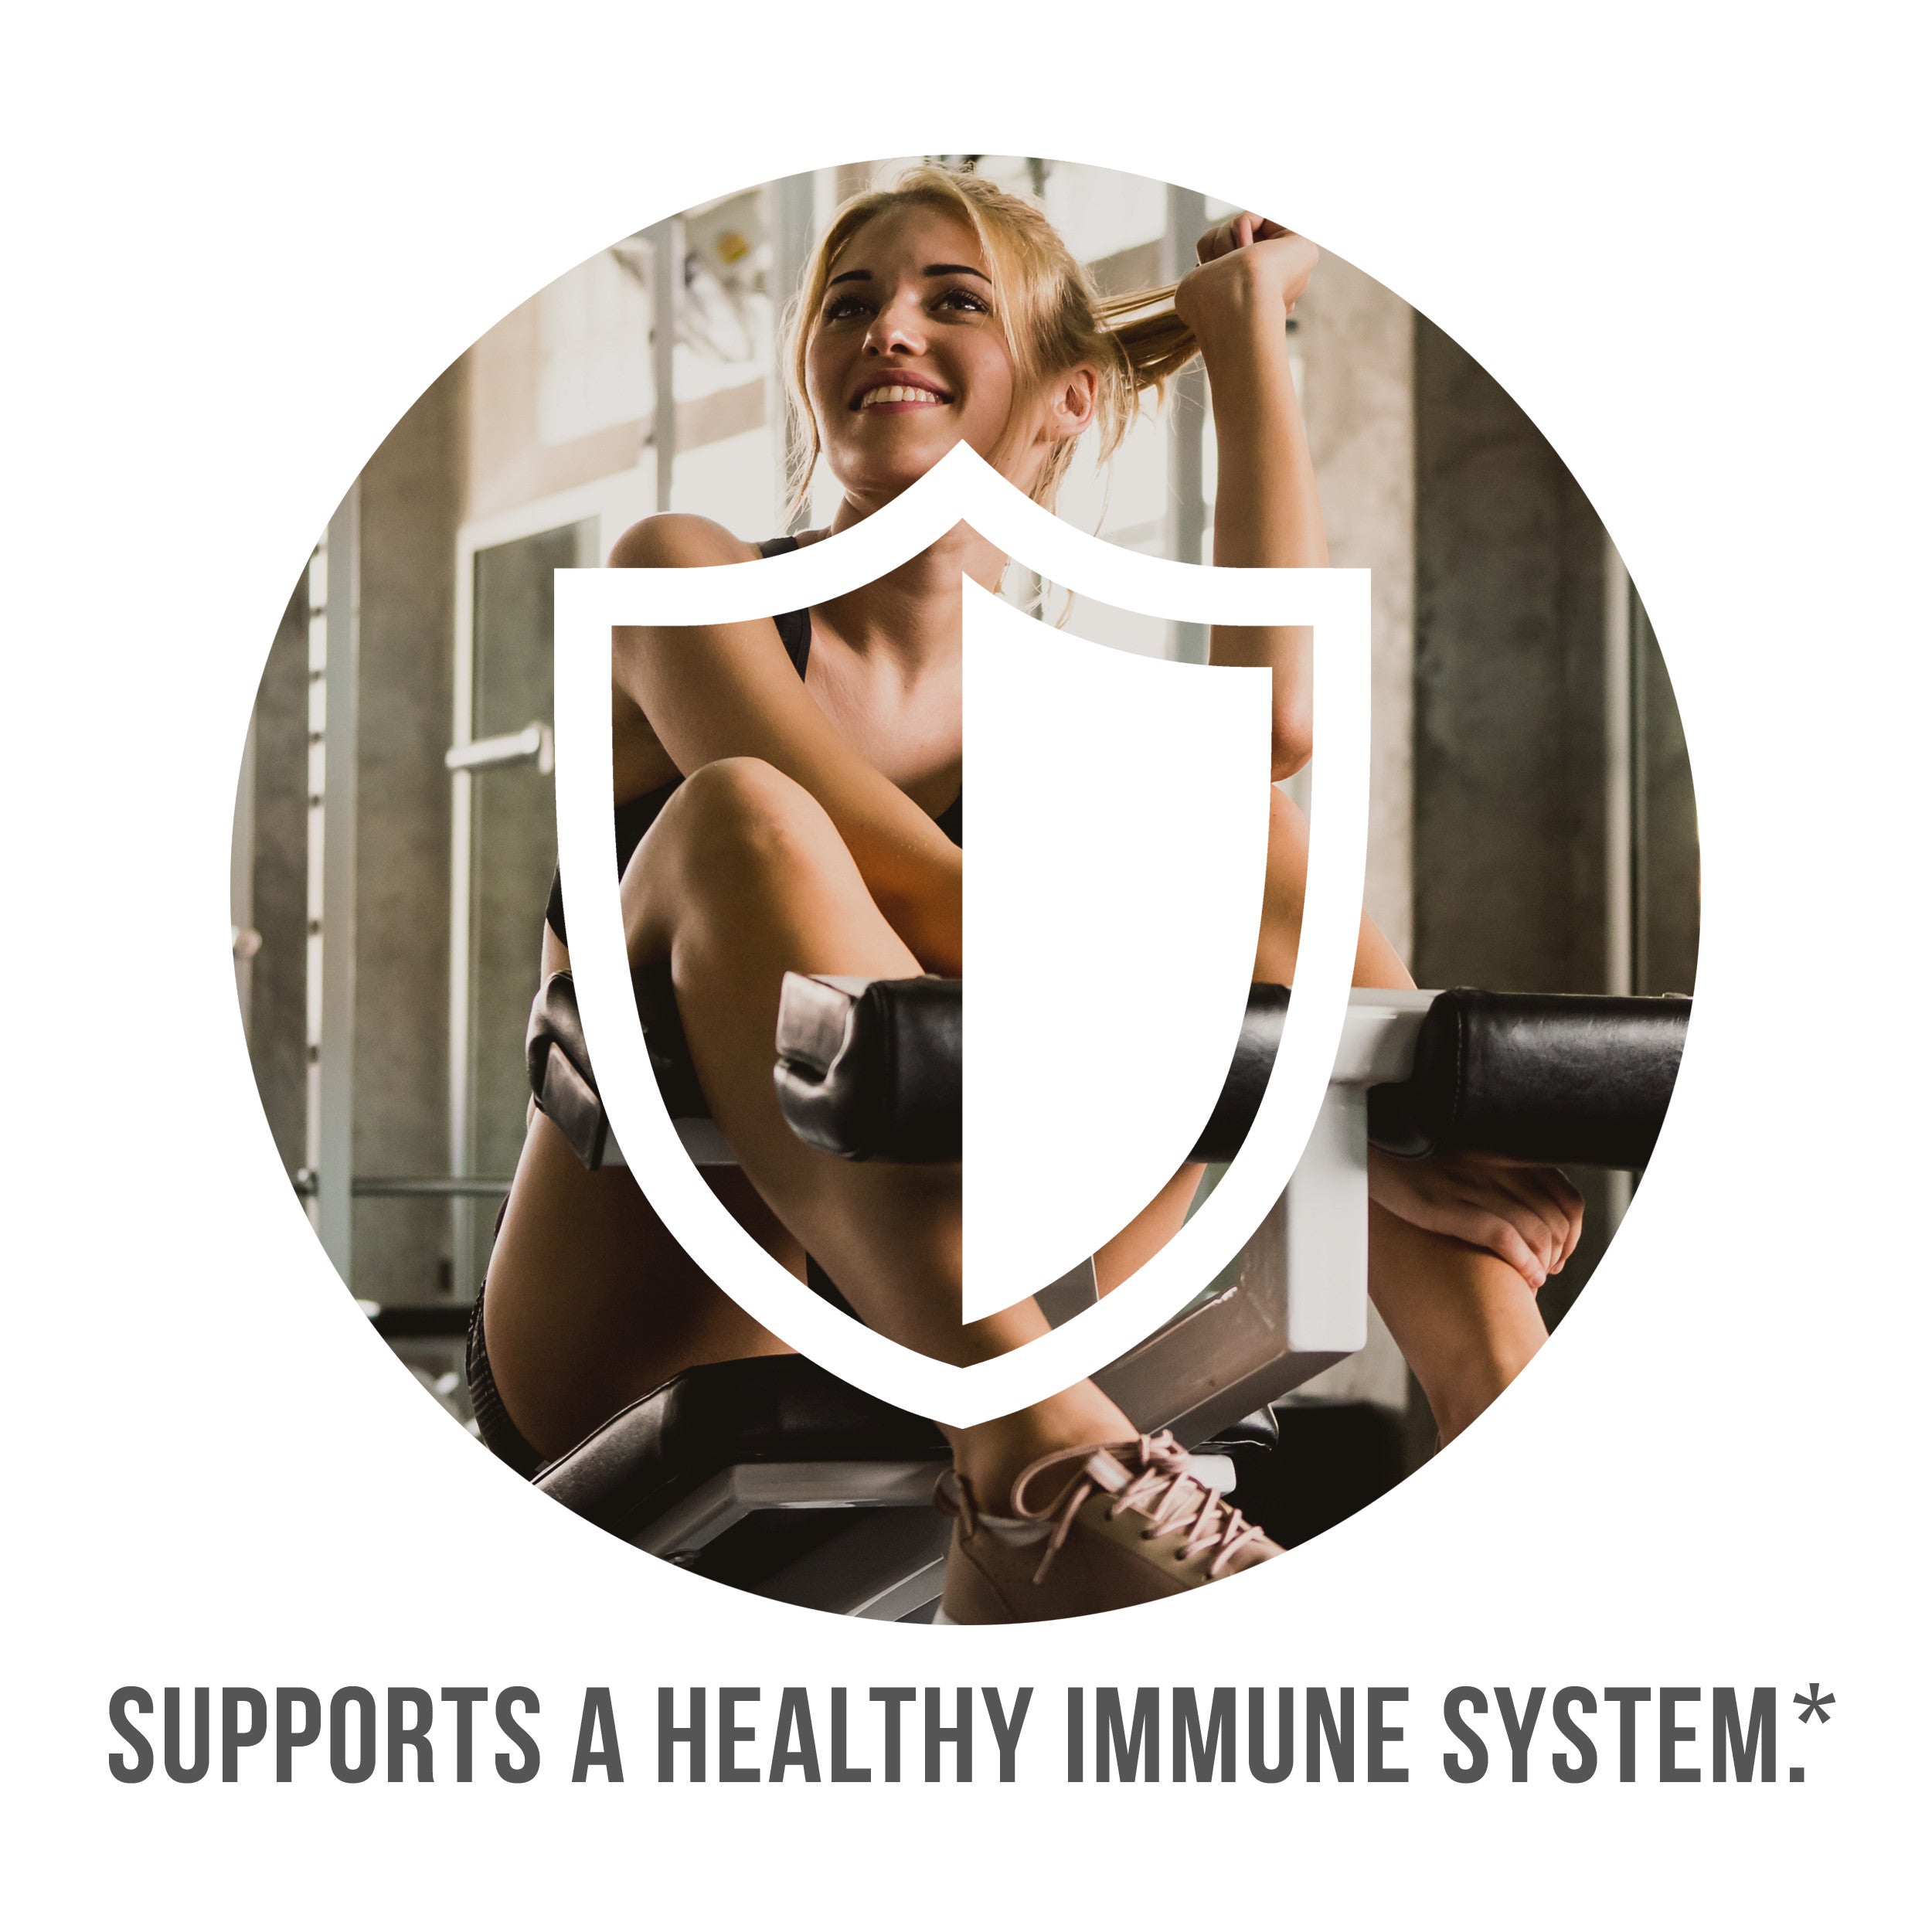 XOS Prebiotic supports a healthy immune system